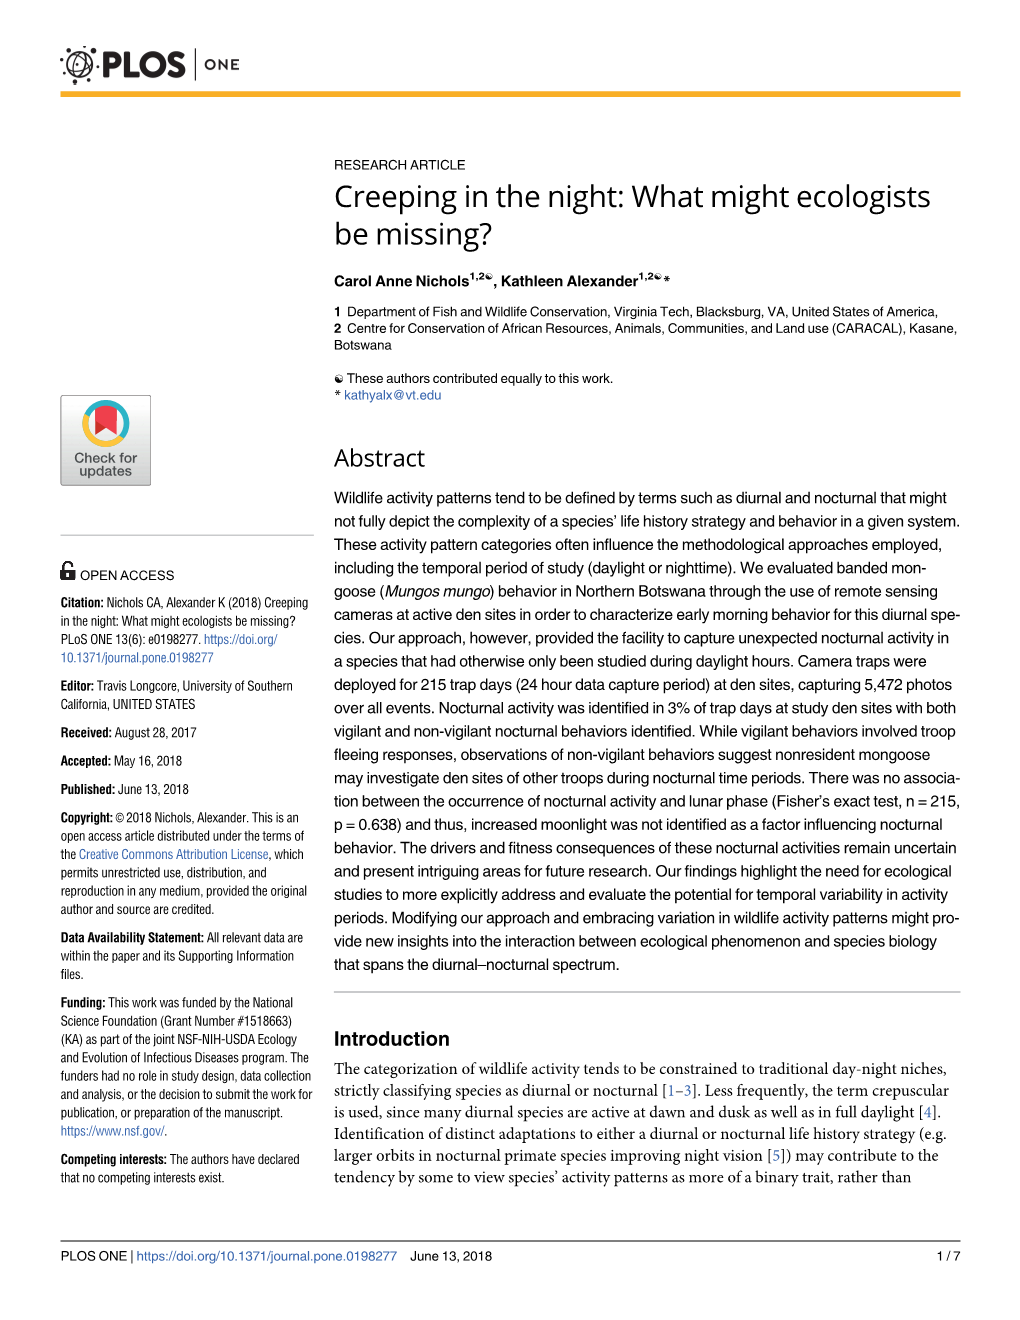 Creeping in the Night: What Might Ecologists Be Missing?